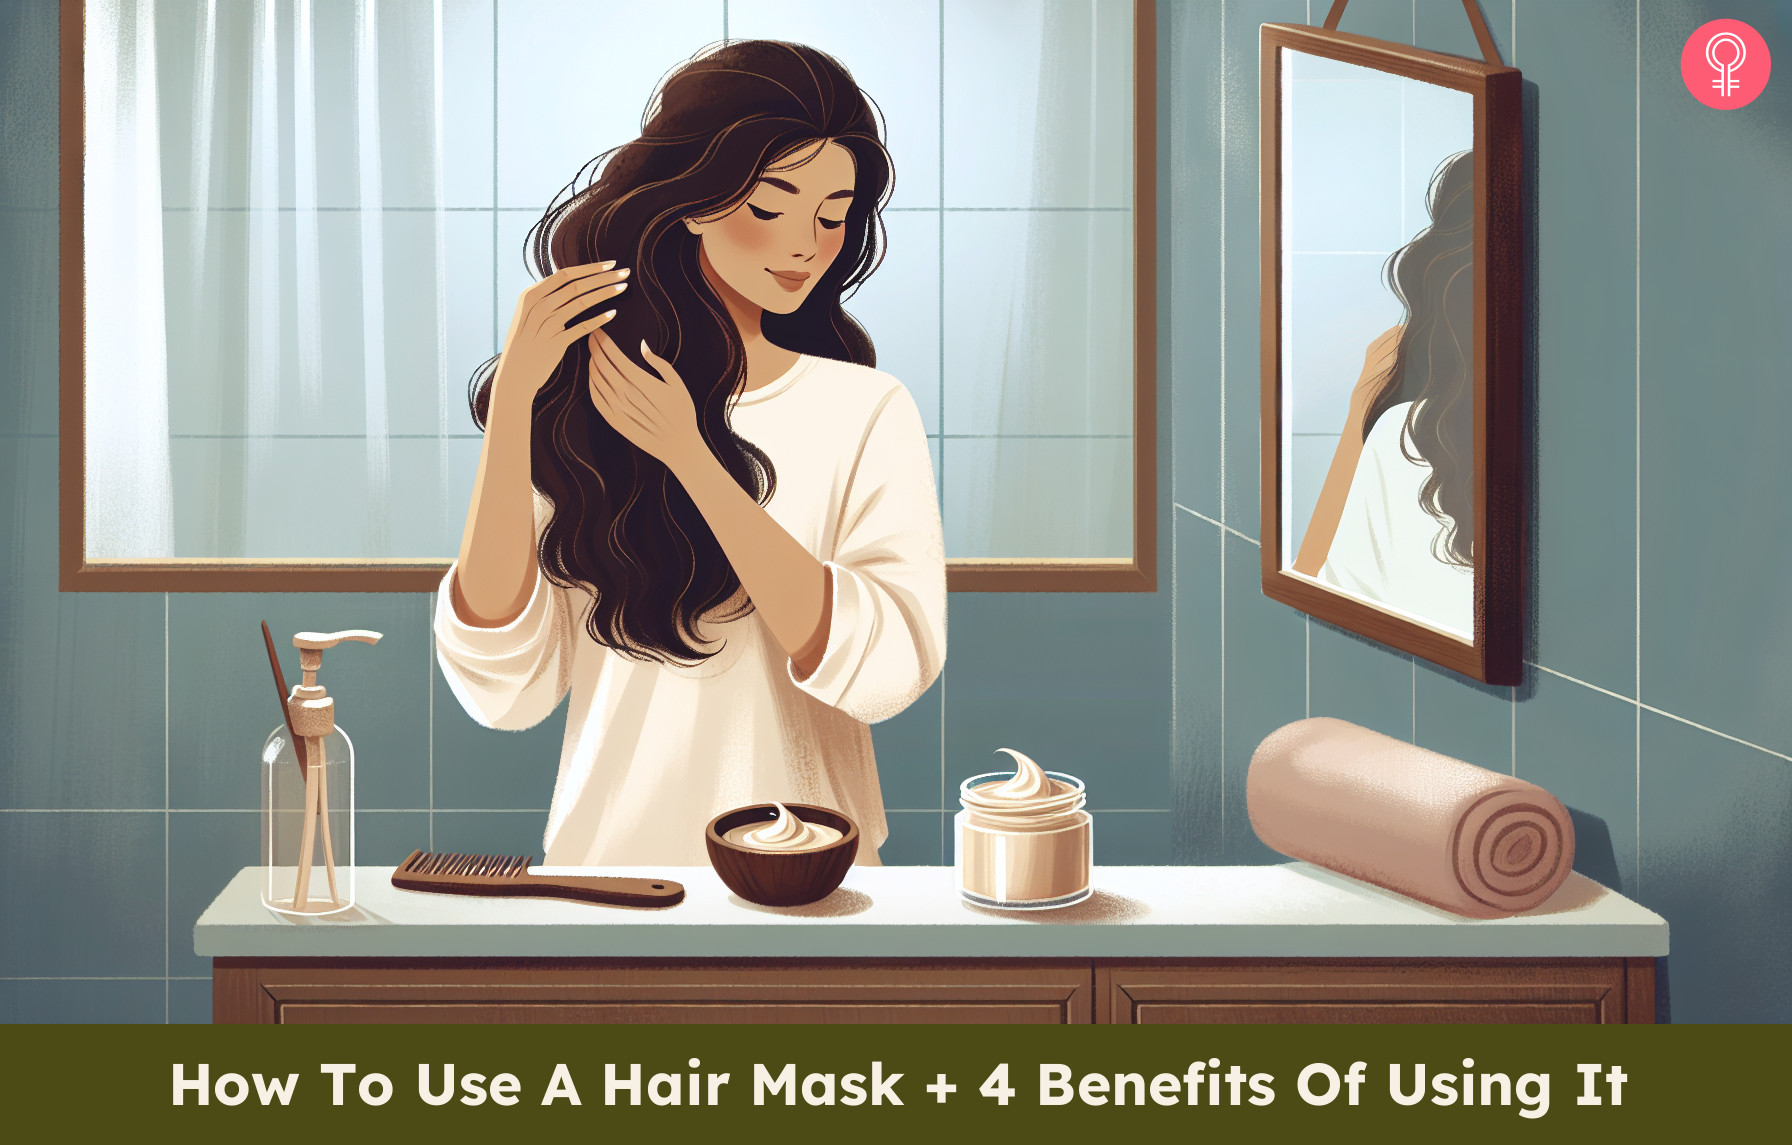 how to use hair mask